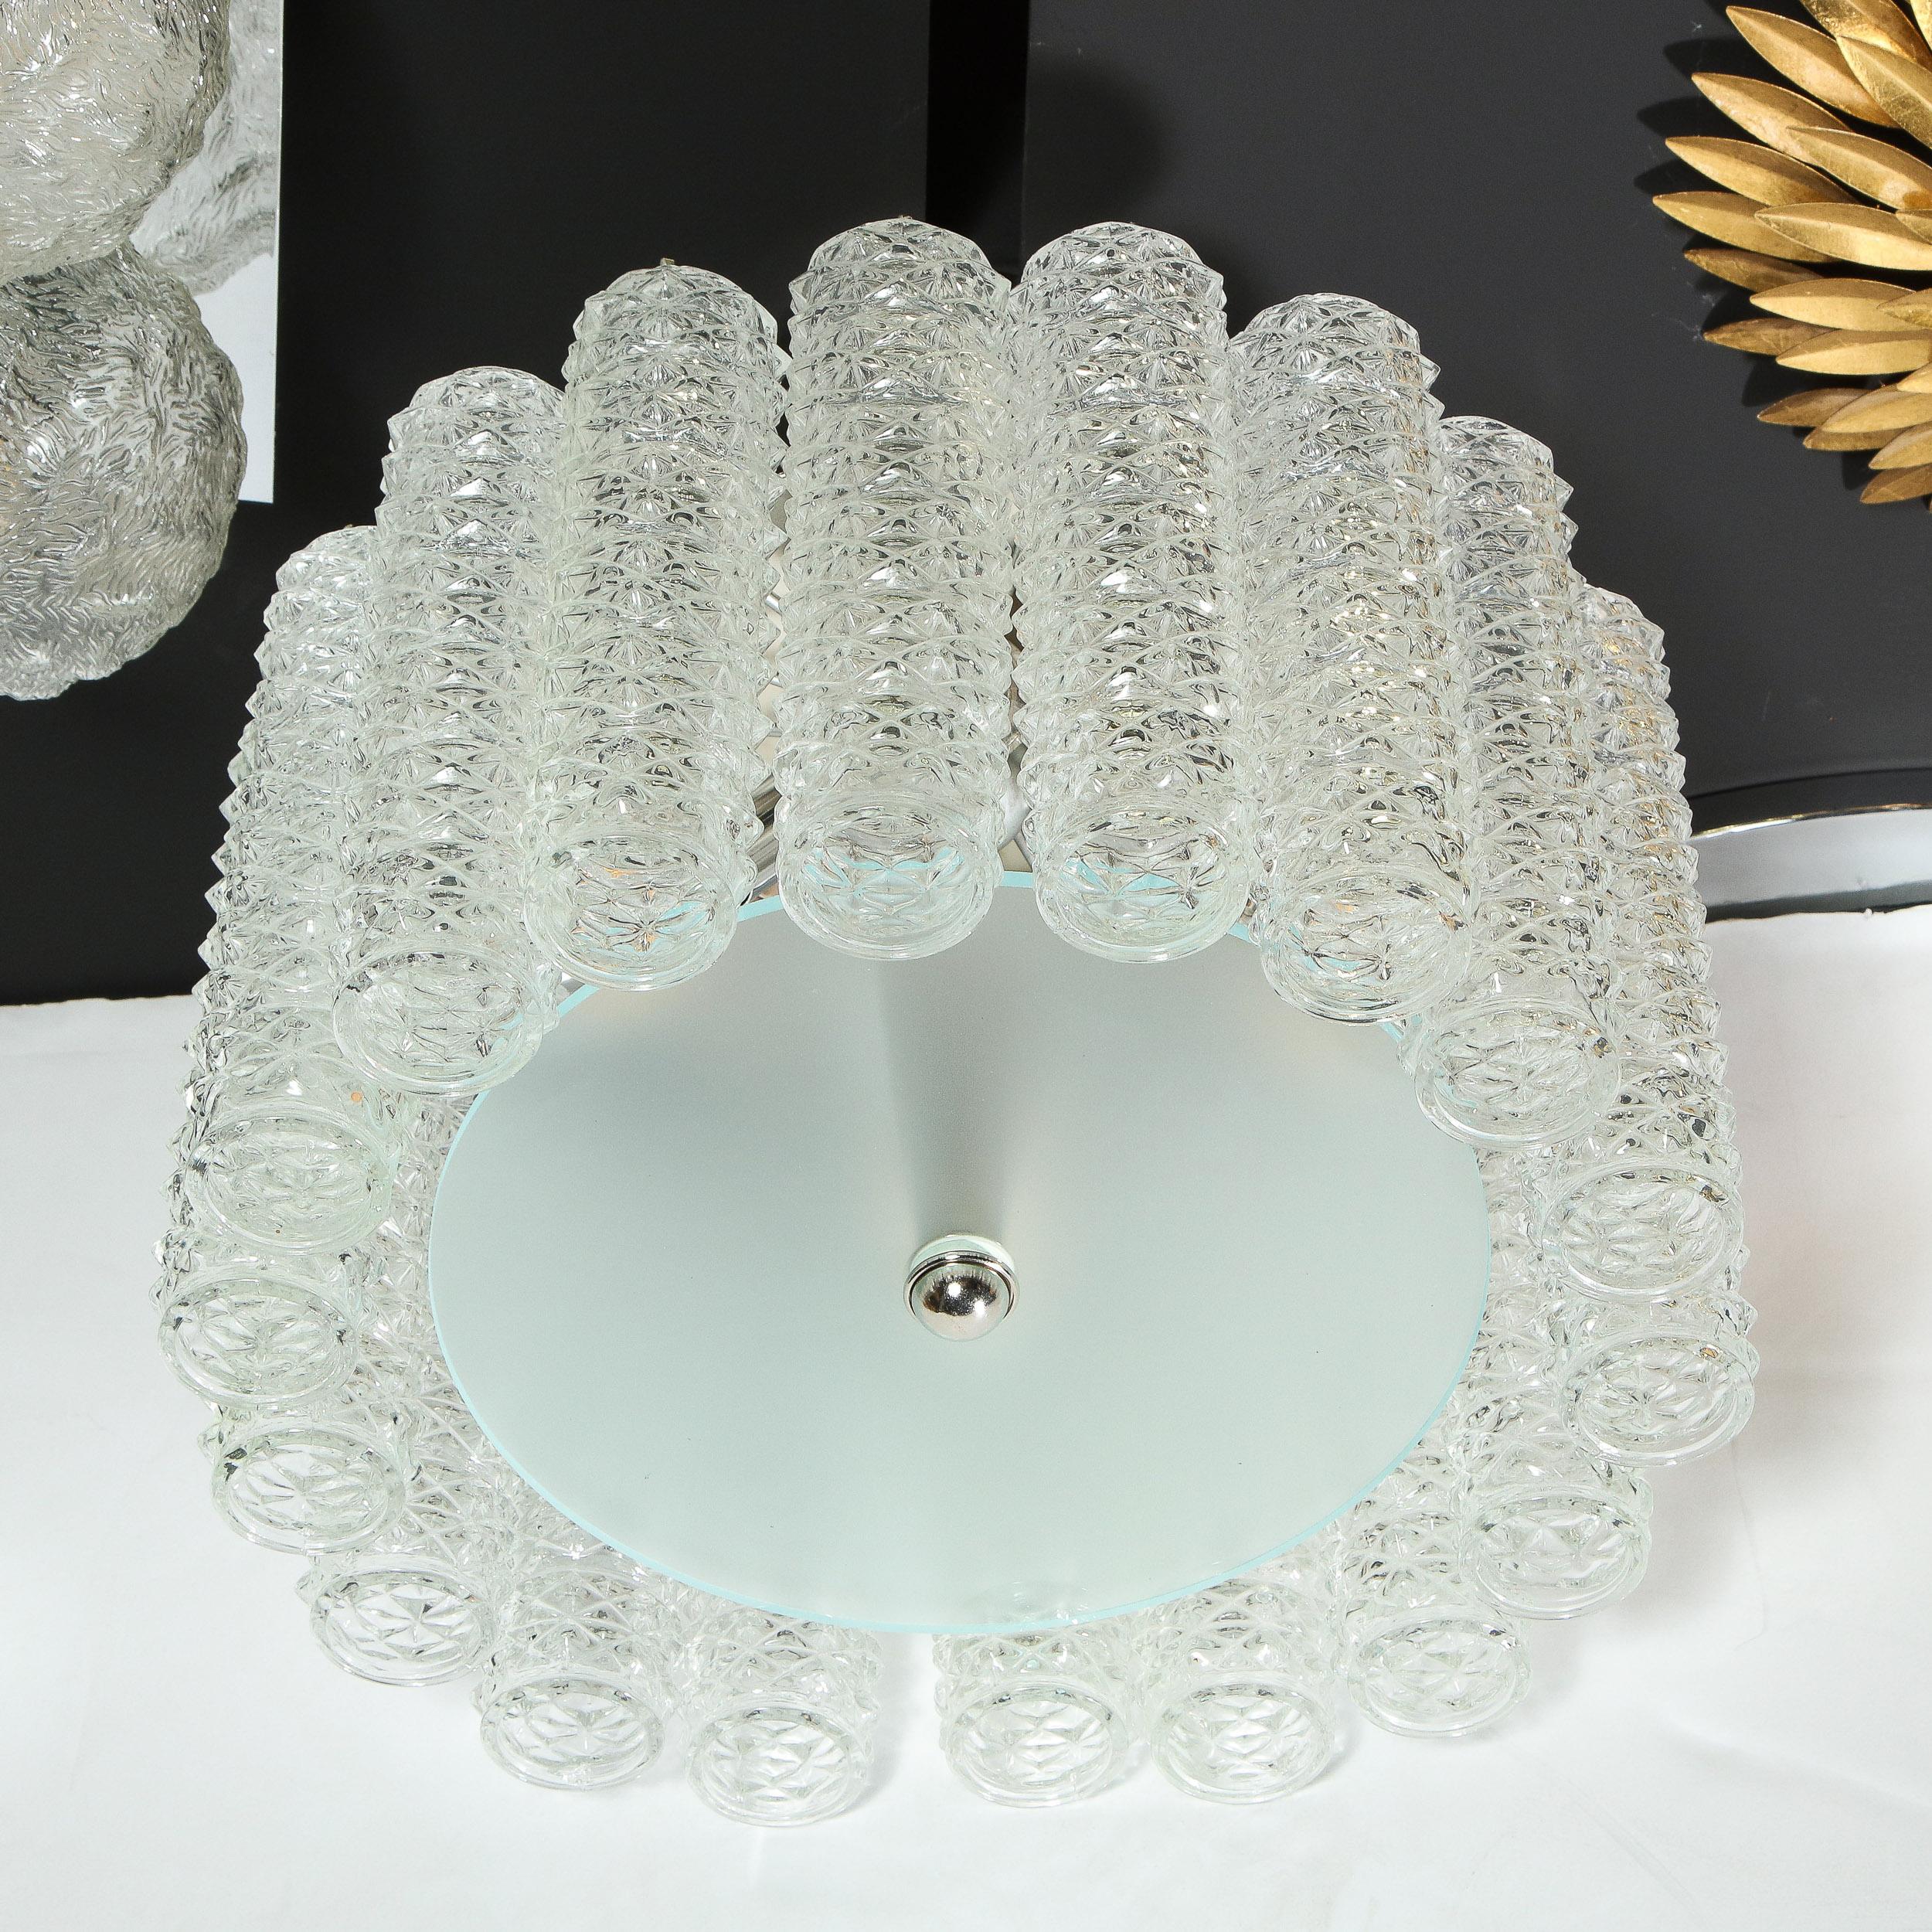 Midcentury Chrome, Hand Blown Translucent and Frosted Murano Glass Chandelier For Sale 2